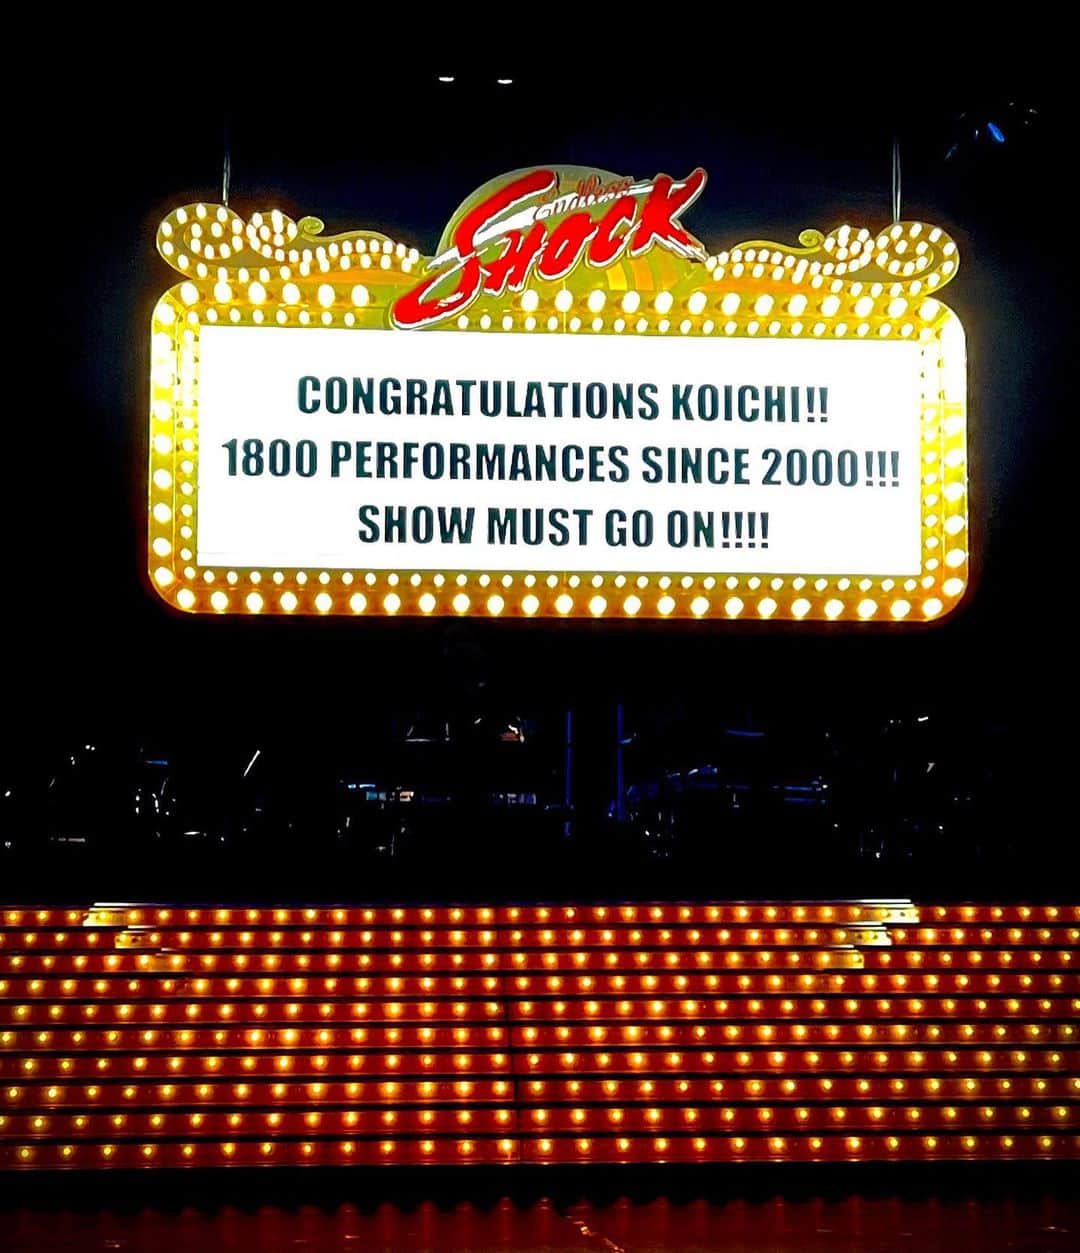 EndlessSHOCK【公式】のインスタグラム：「CONGRATULATIONS KOICHI !! 1800 PERFORMANCES SINCE 2000 !!! SHOW MUST GO ON !!!!」